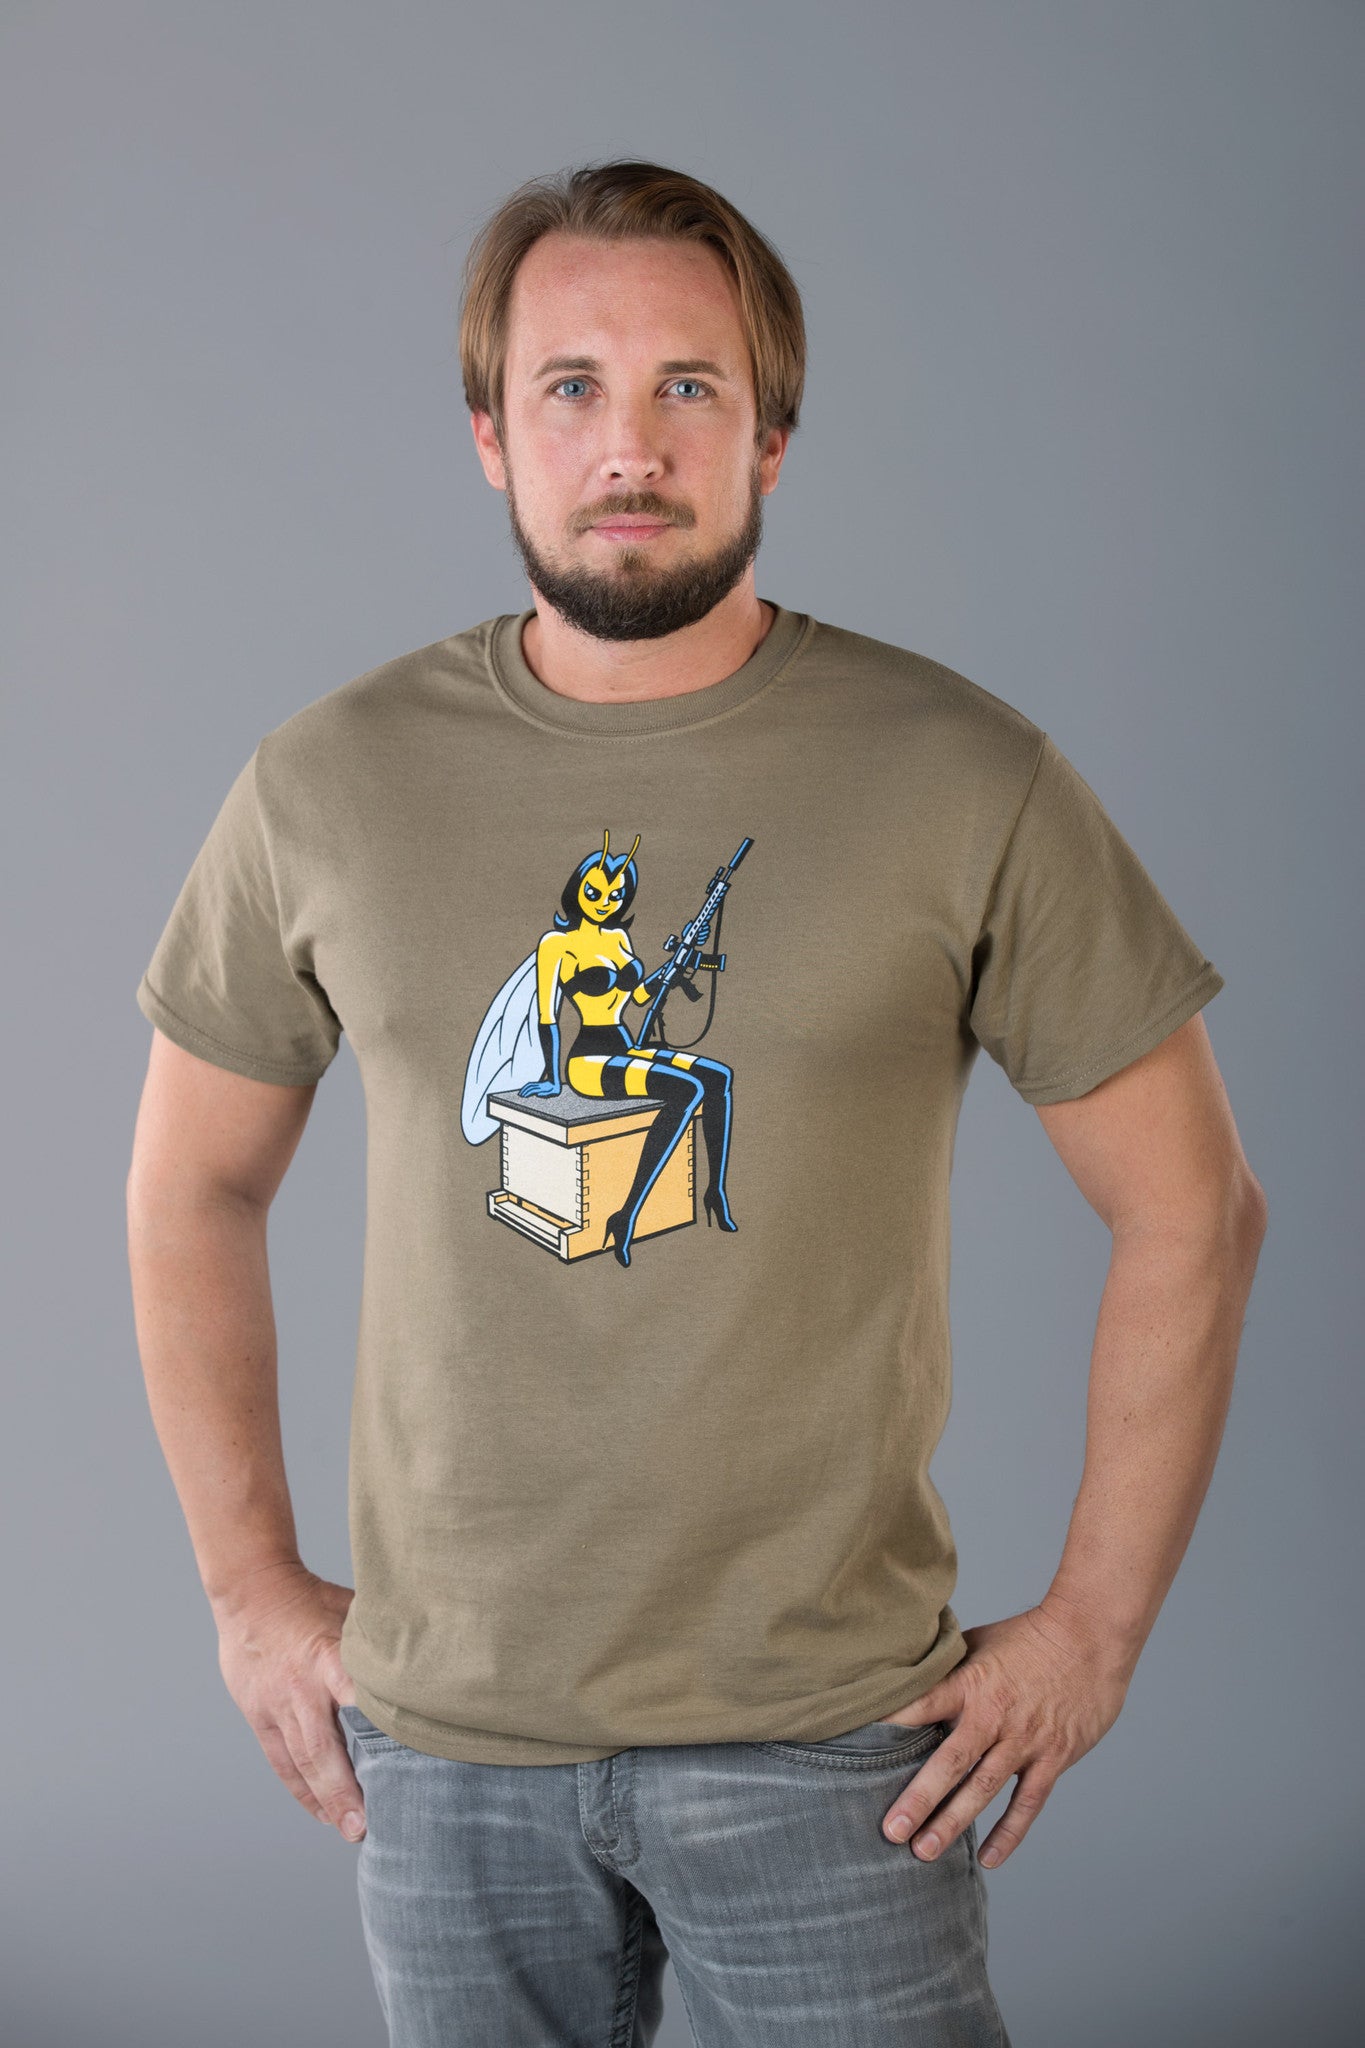 Men's "Protect The Hive" M4 T-Shirt - OD Green